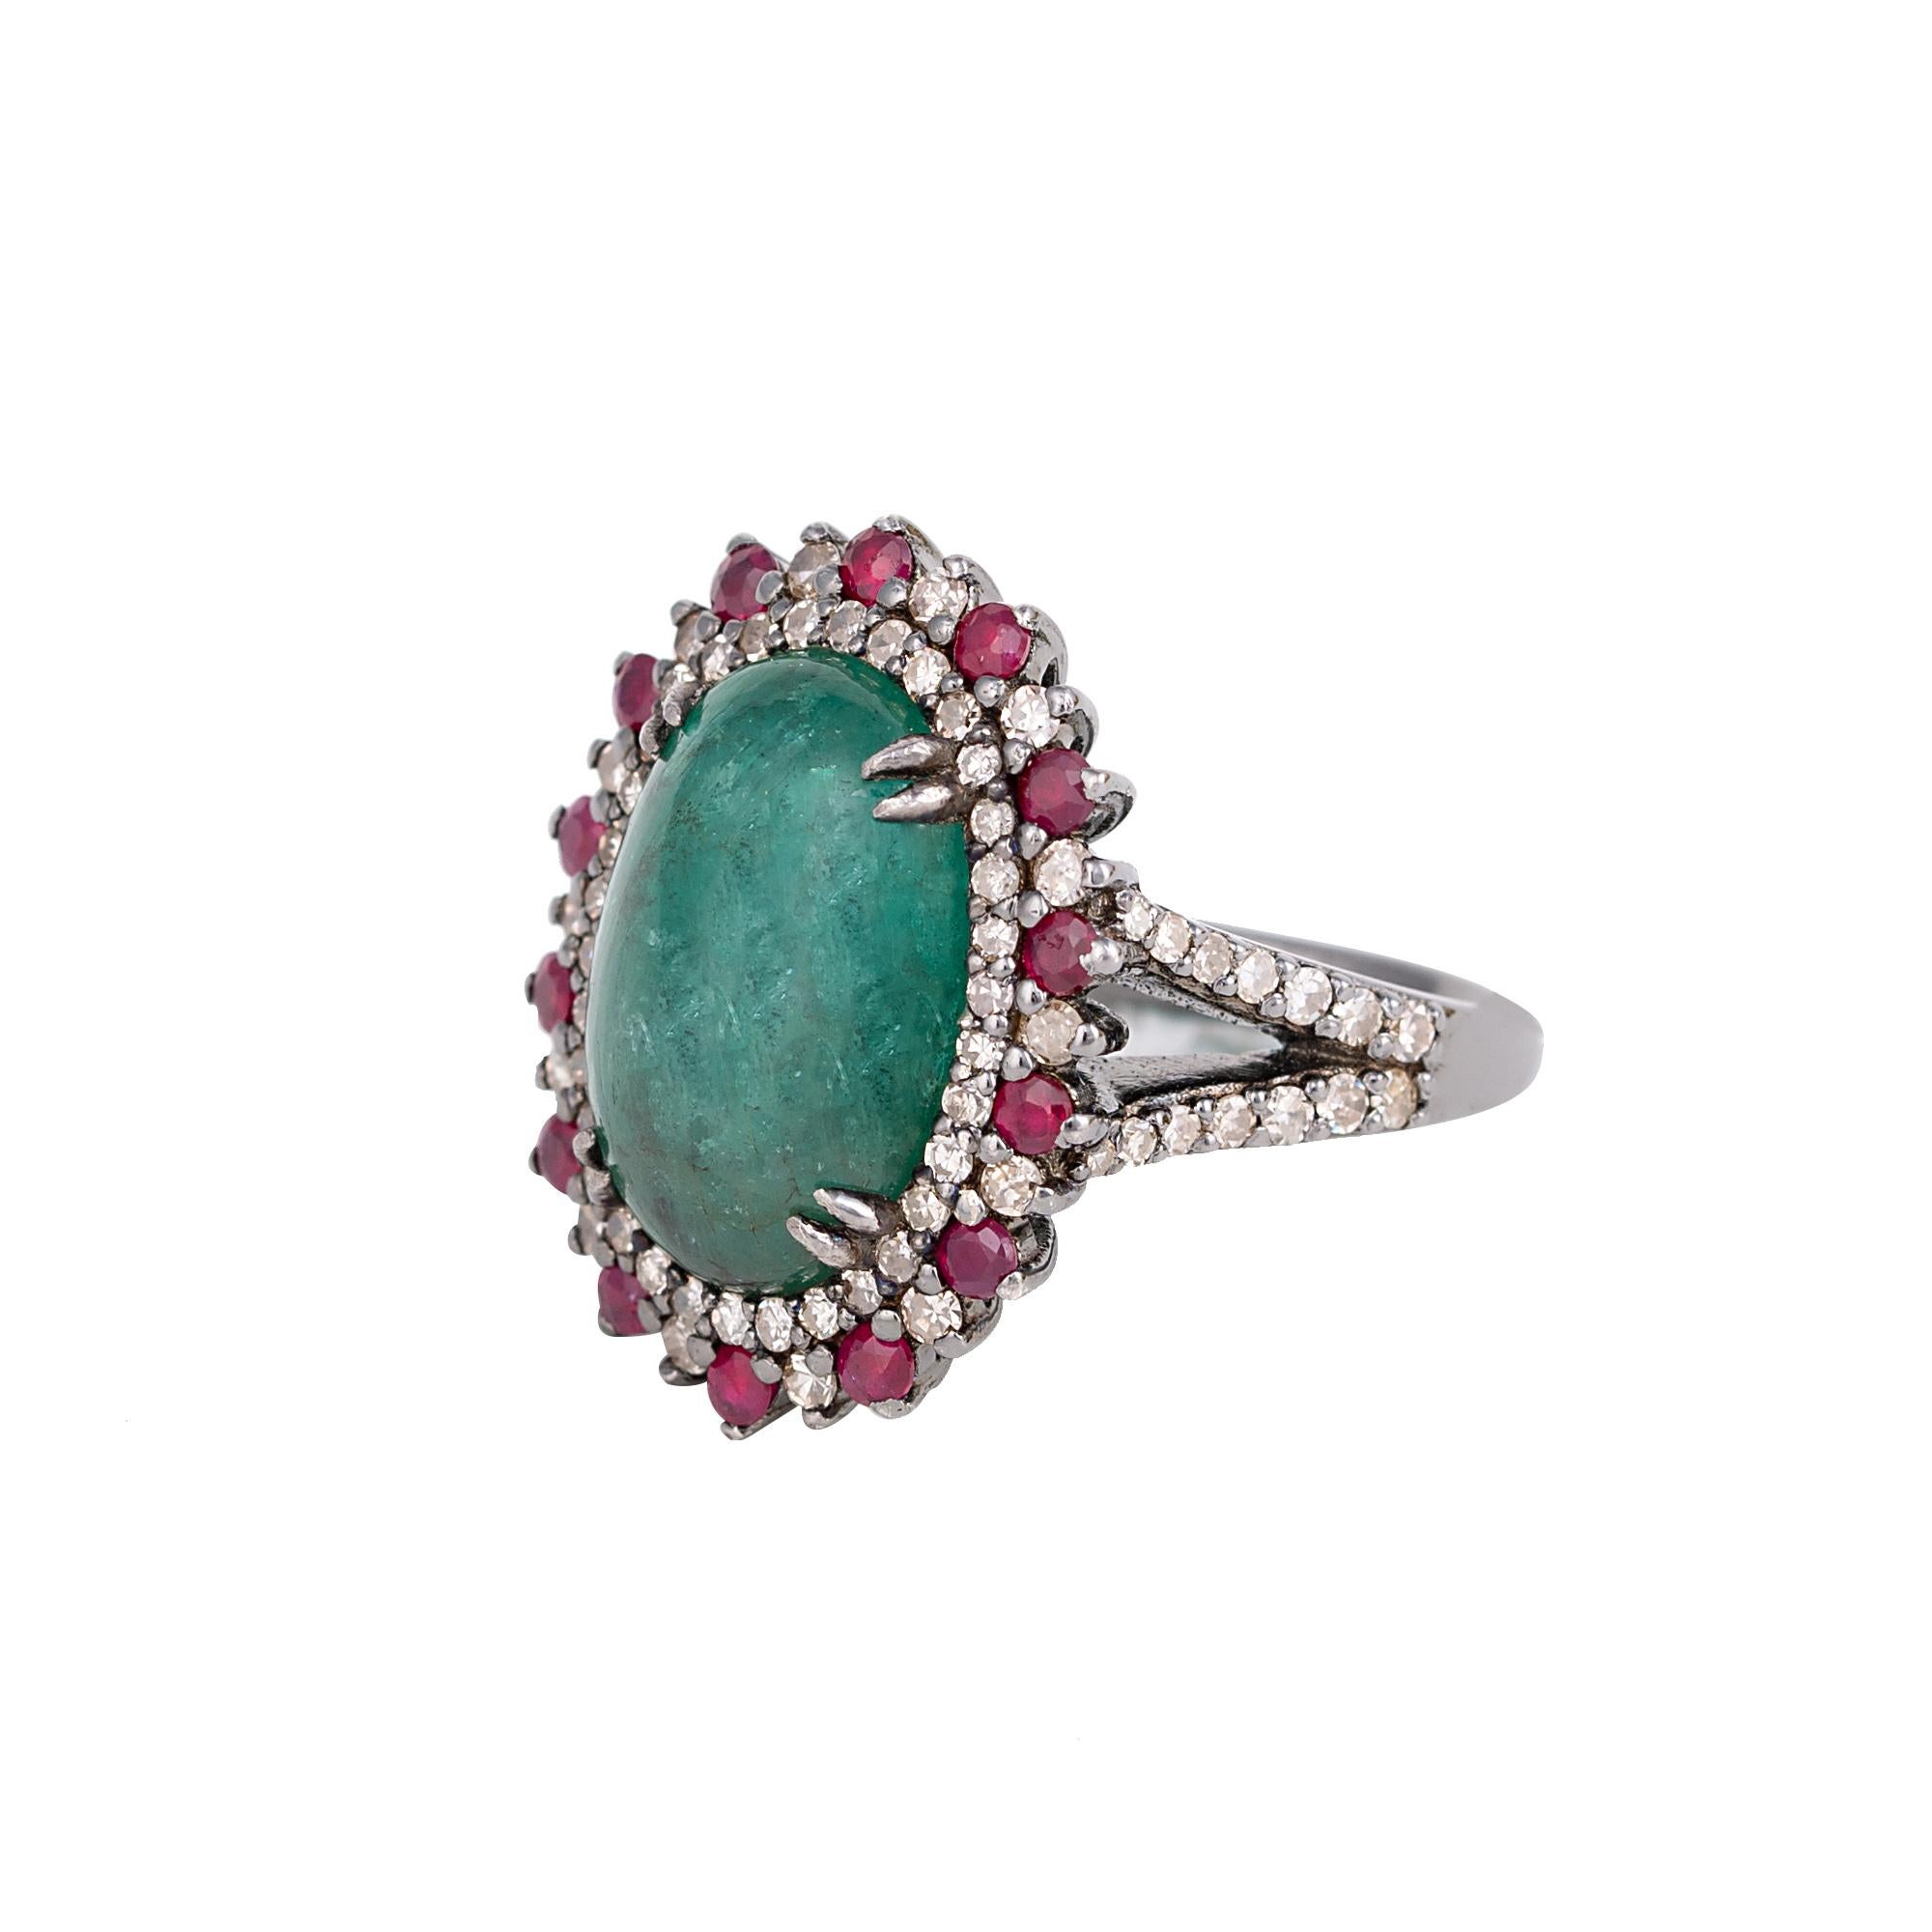 7.70 Carat Cabochon-Cut Emerald, Diamond, and Ruby Cocktail Ring in Art-Deco For Sale 1